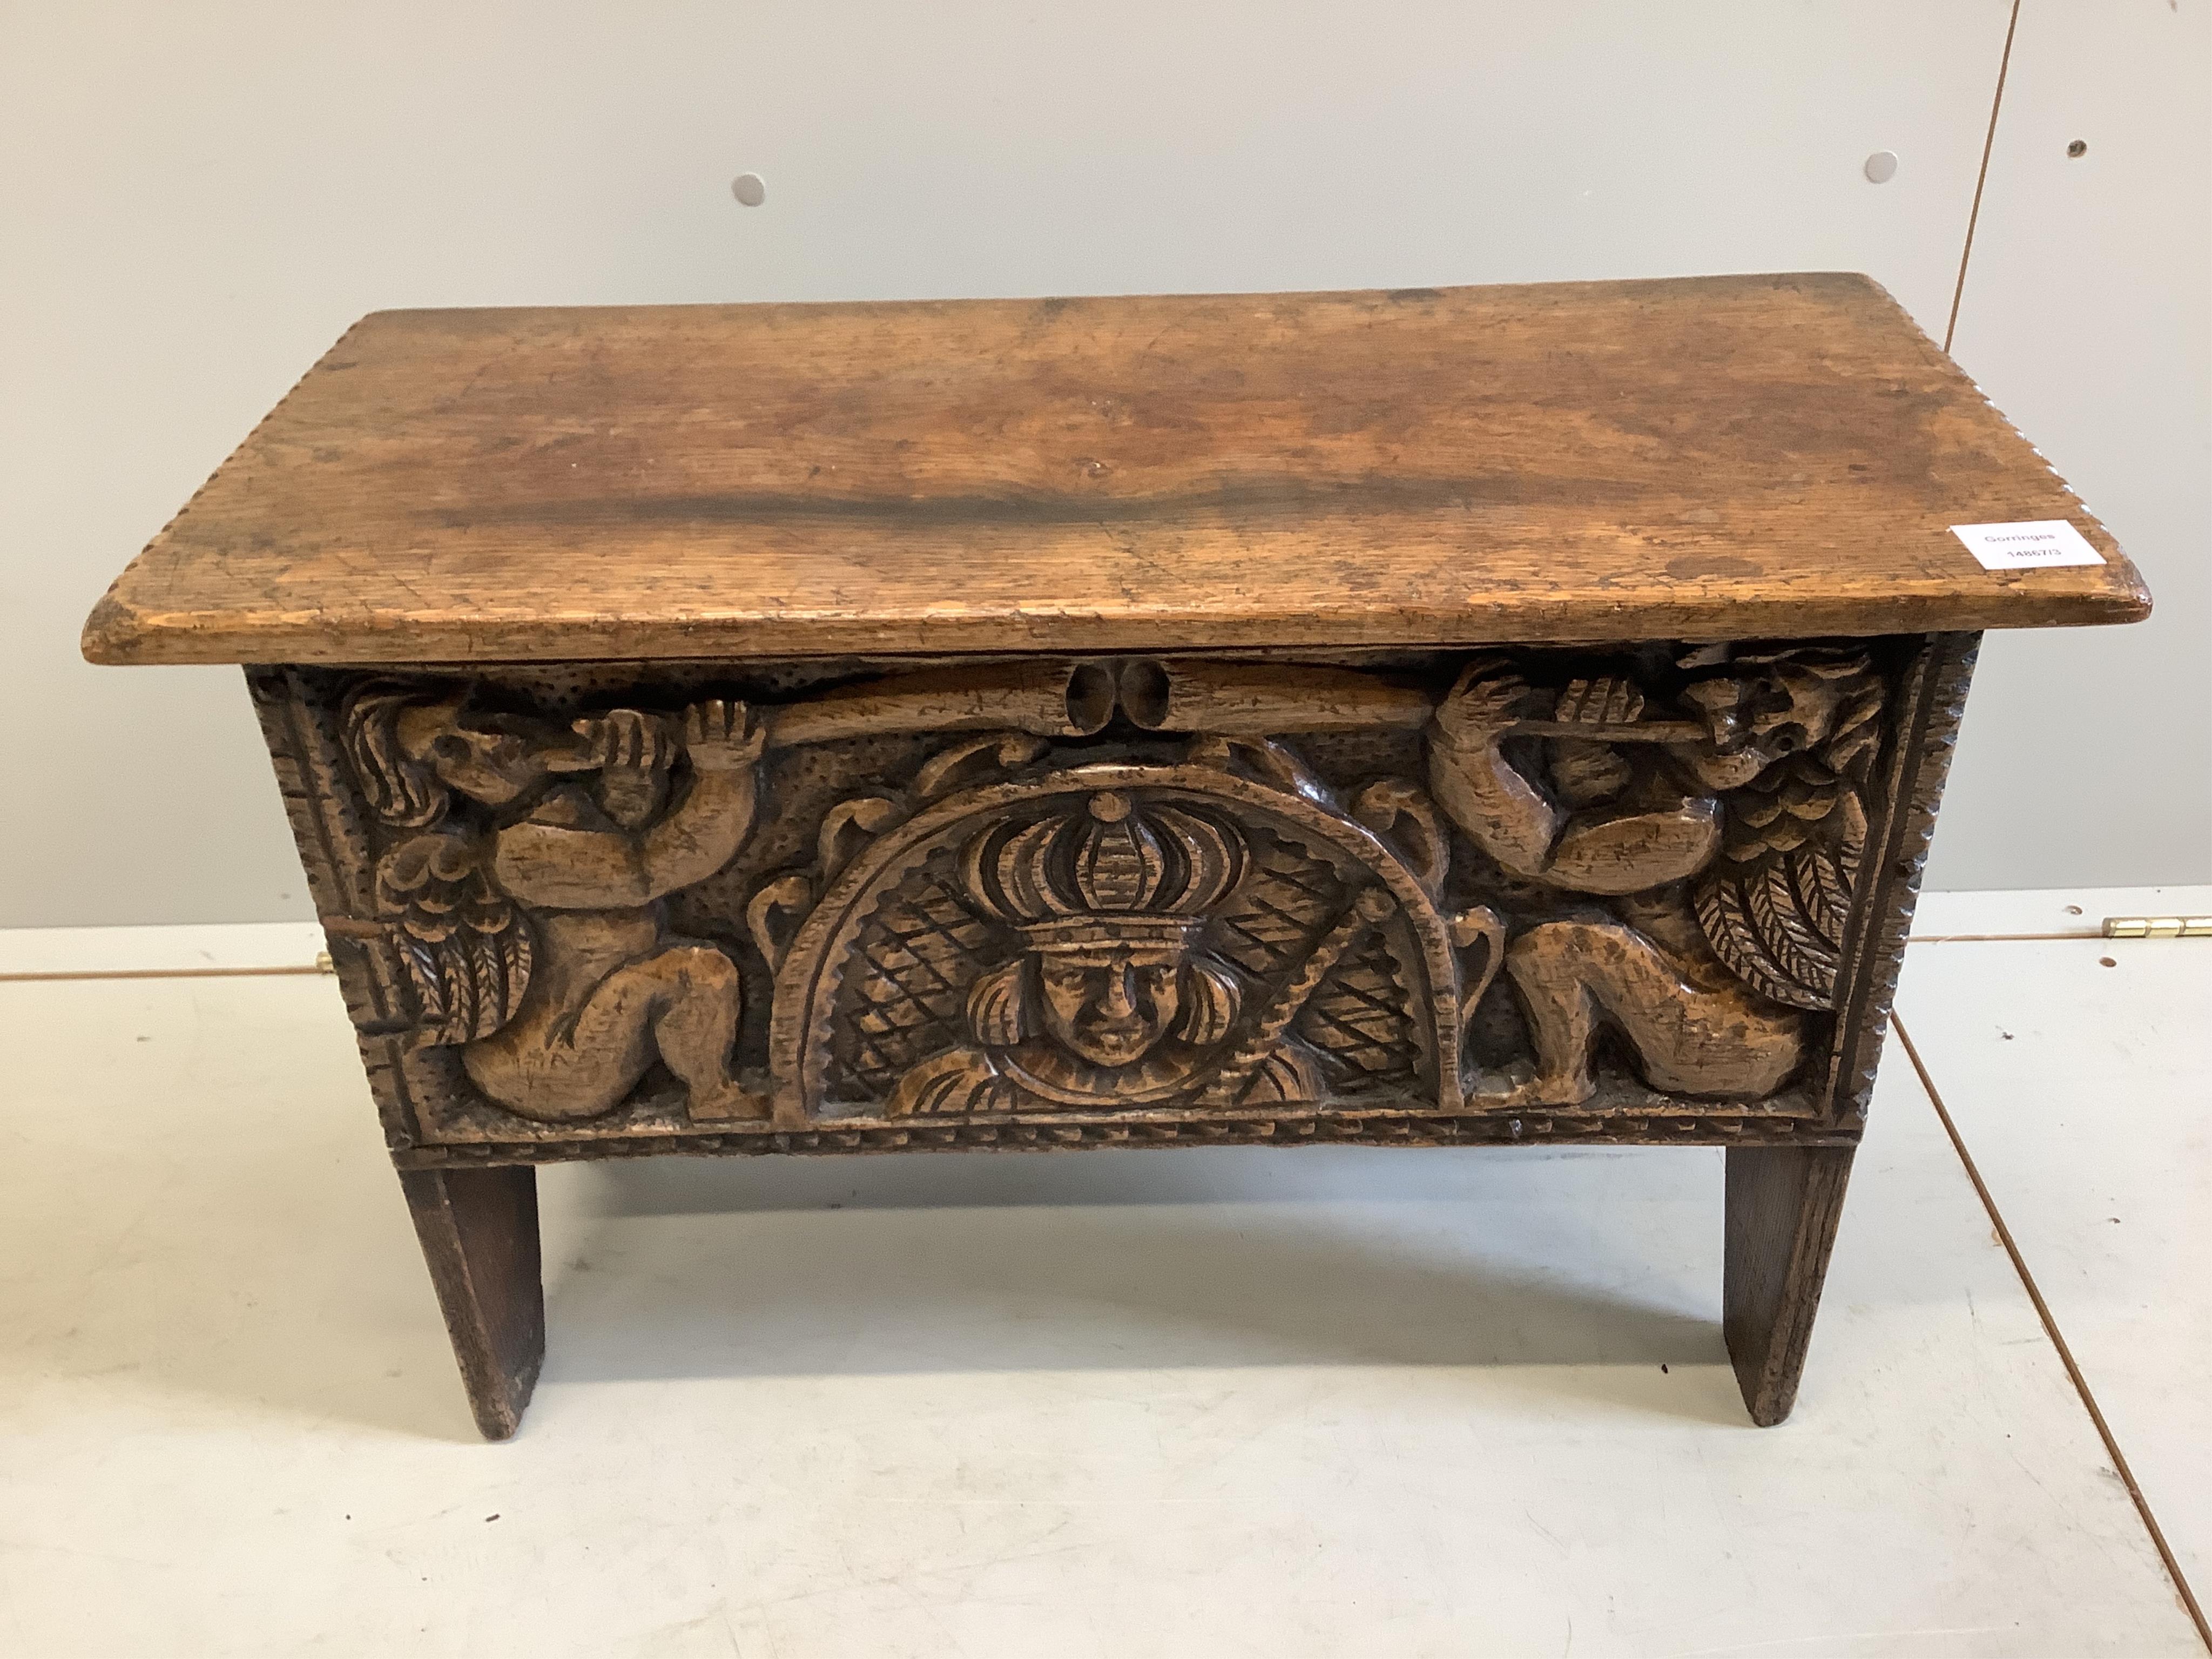 A small reproduction Tudor style carved oak coffer, the front carved with a king and trumpeting cherubs, width 68cm, depth 31cm, height 45cm. Condition - good